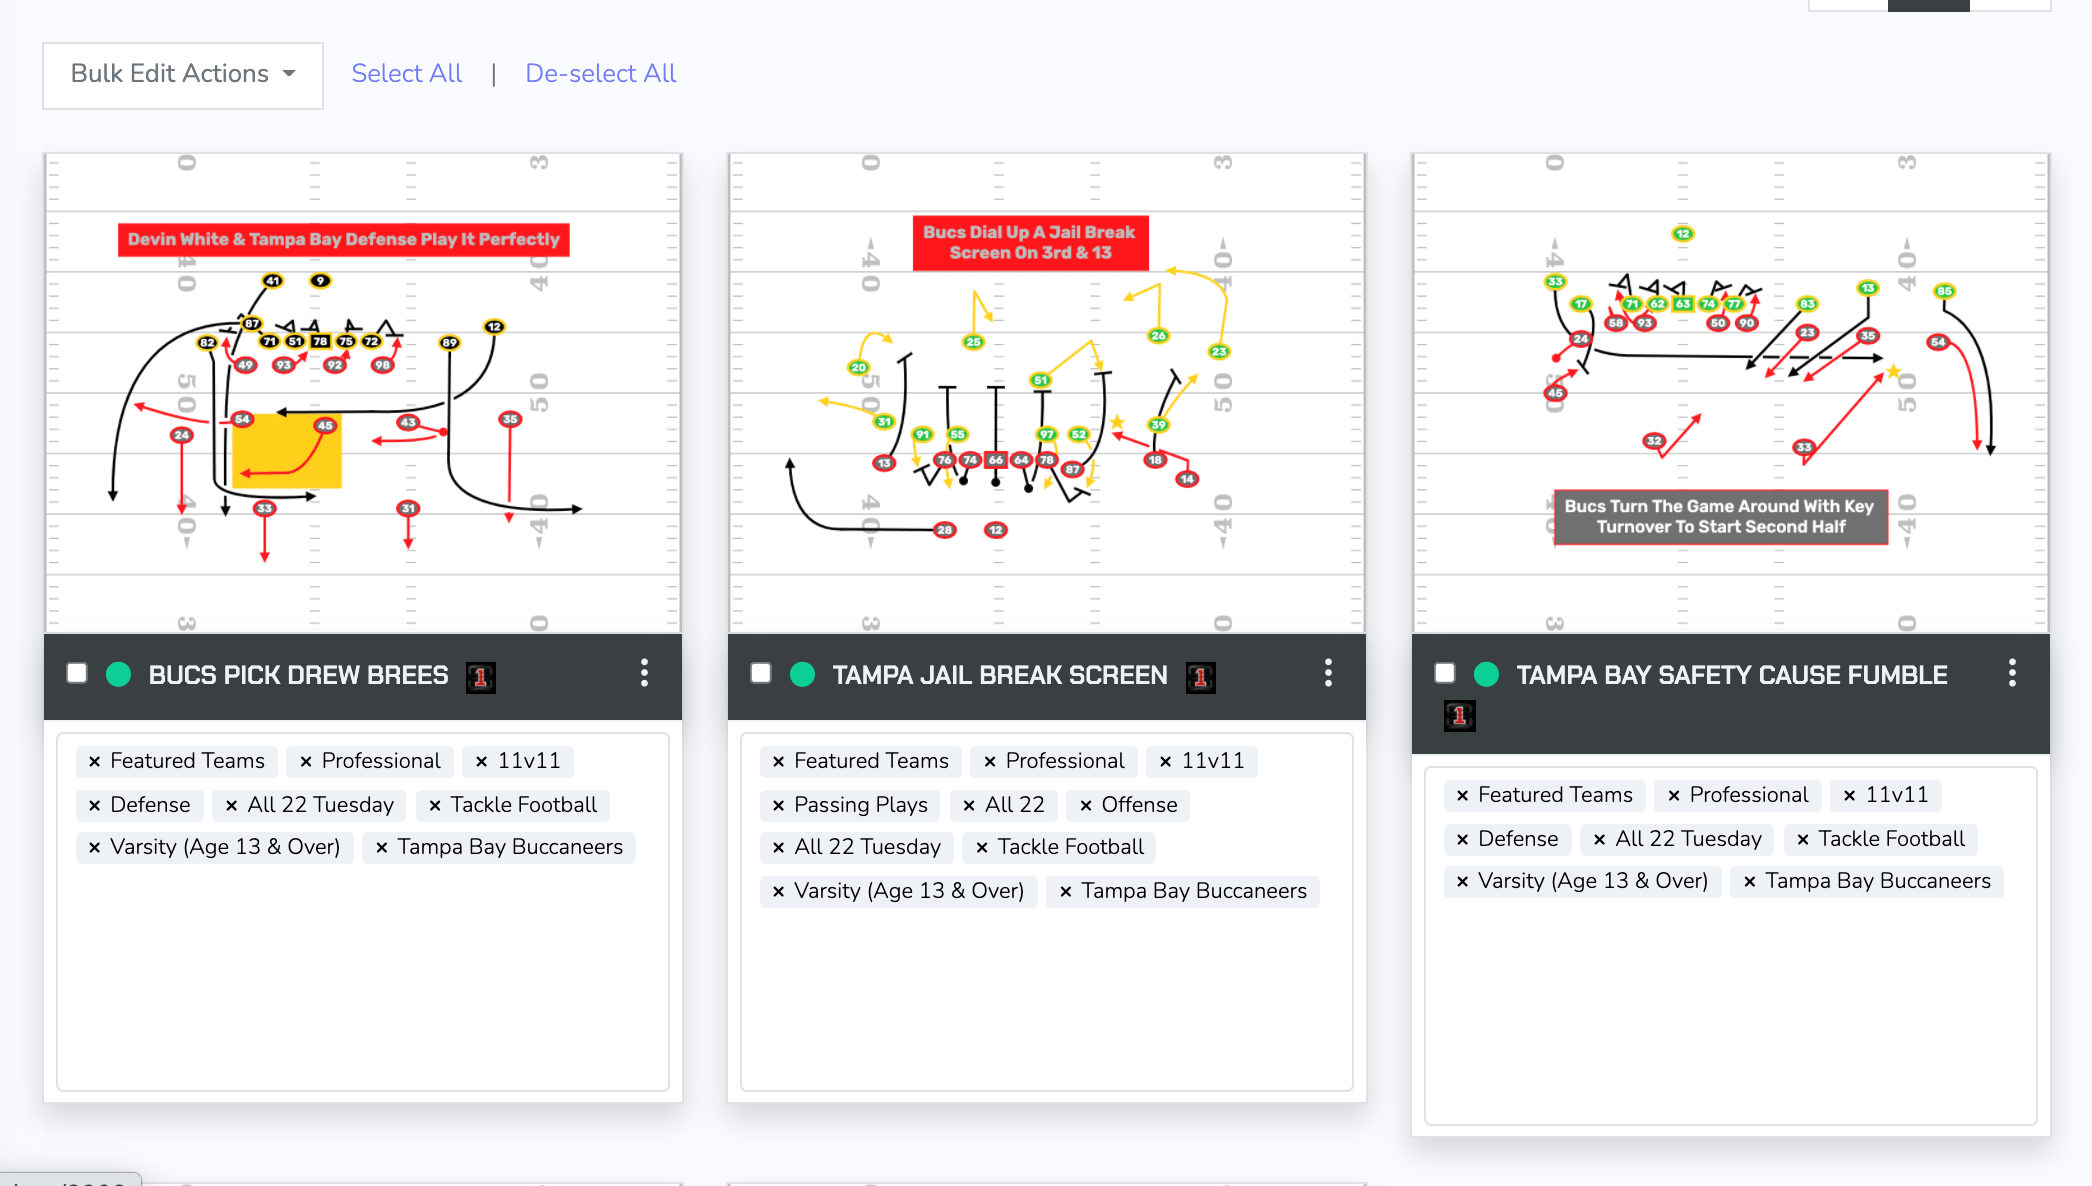 Your Team Is A FirstDown PlayBook Featured Team